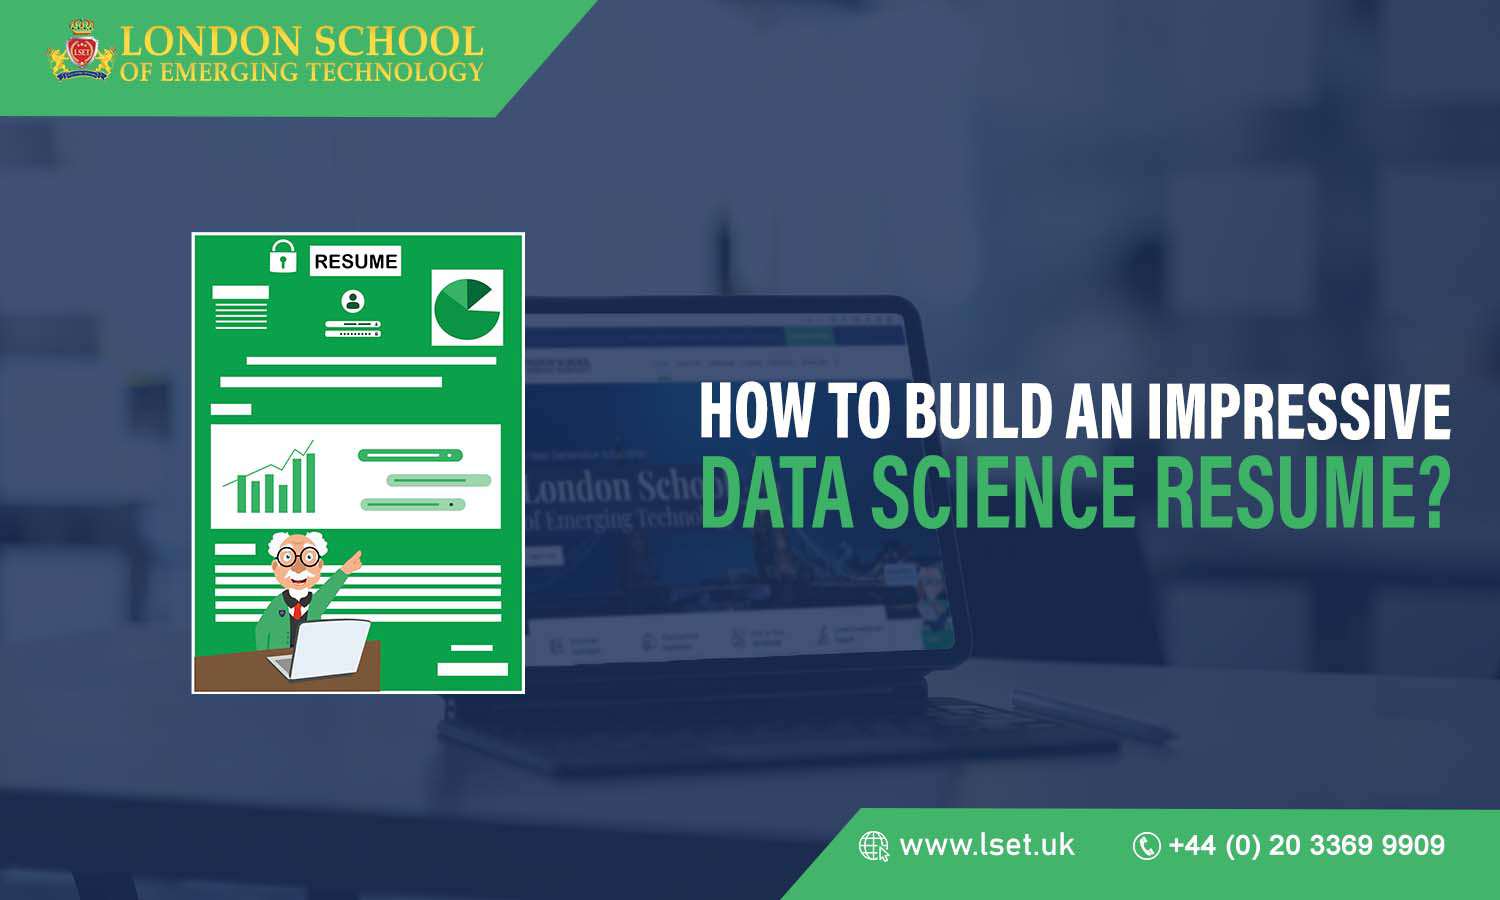 How to Build an Impressive Data Science Resume